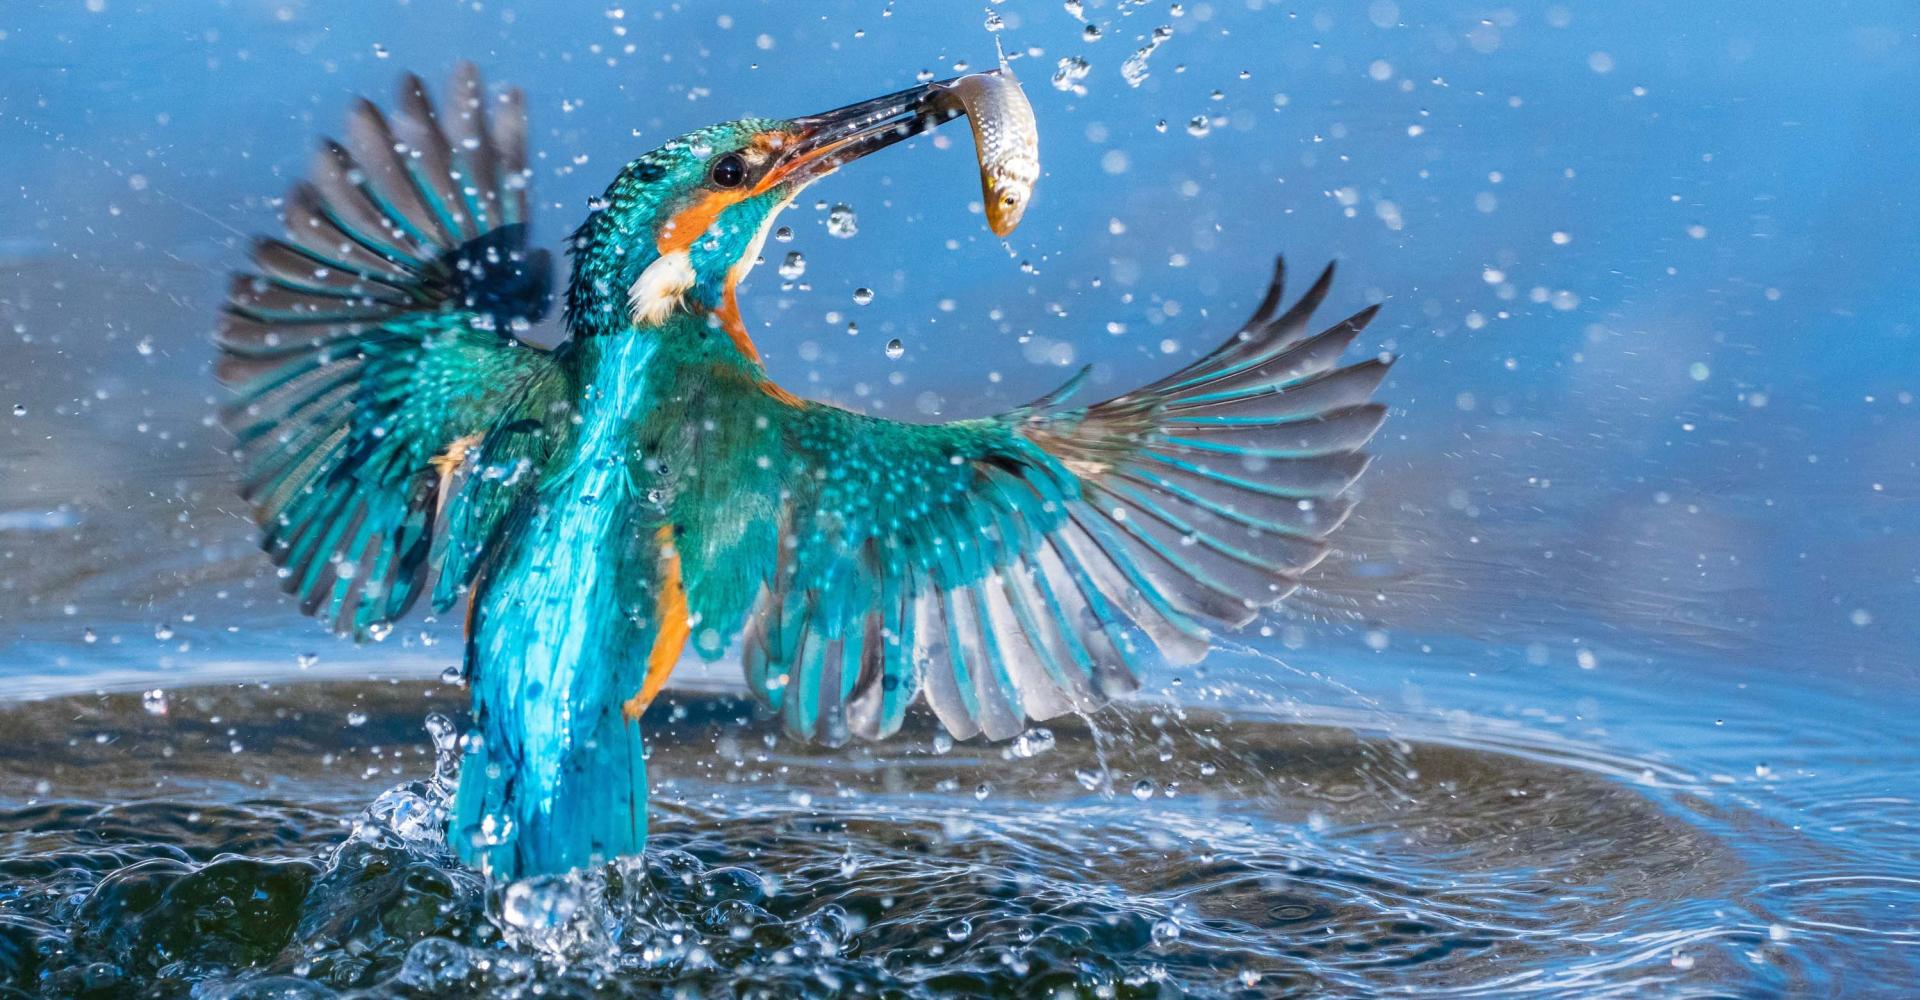 bird jumping out of water holding fish with its beak